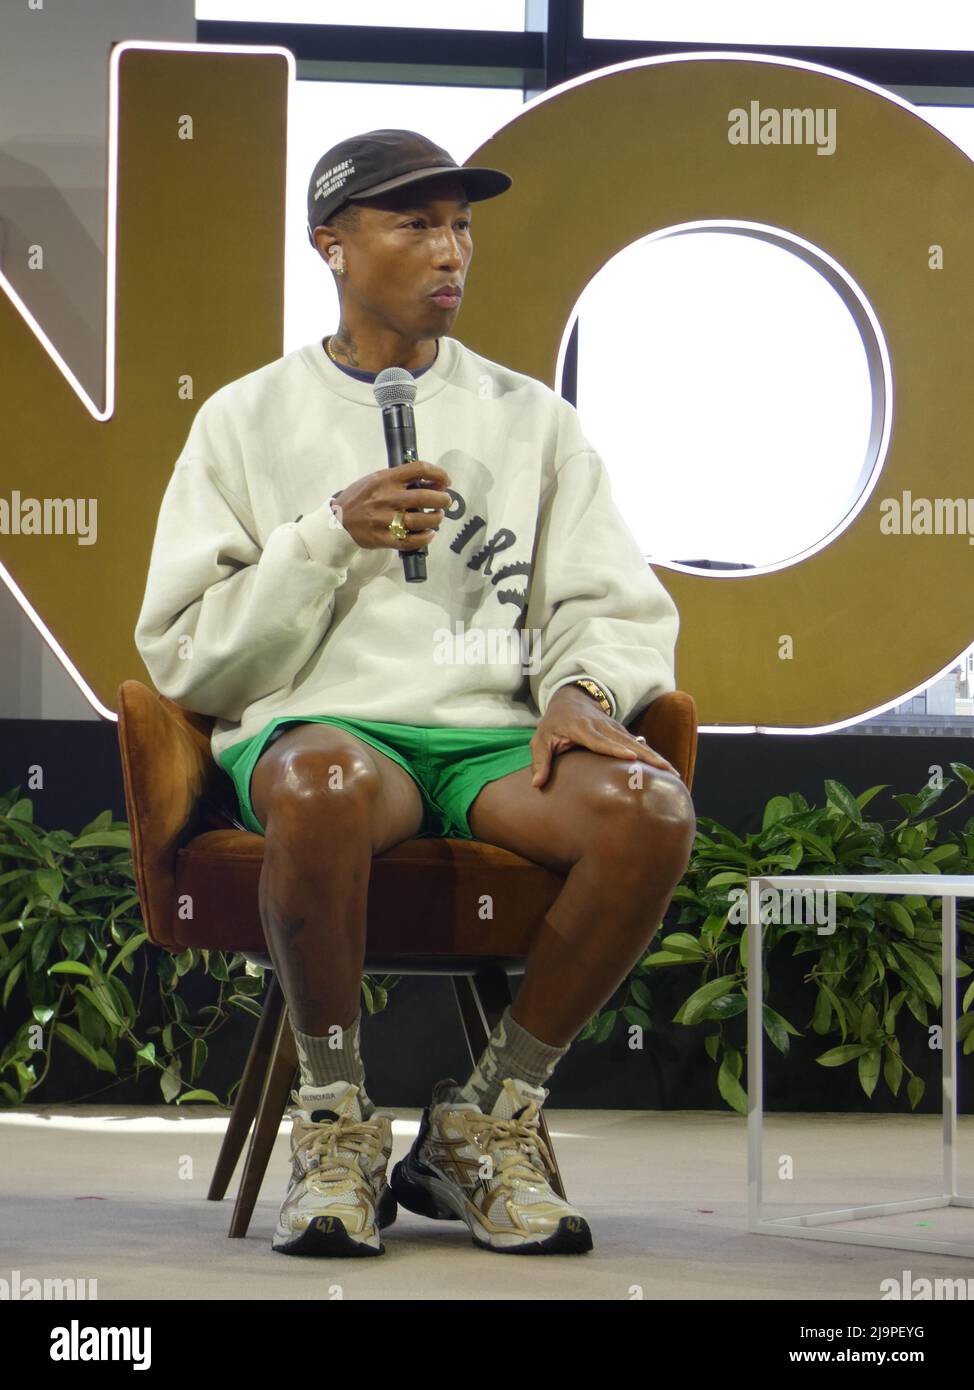 Global Citizen Now, Spring Studios, New York, NY, USA. May 23, 2022. Pharrell Williams Appears at the 2022 New York 'Global Citizen NOW' Event Targeted at 'Saving the Planet'. Credit: ©Julia Mineeva/EGBN TV News/Alamy Live News Stock Photo